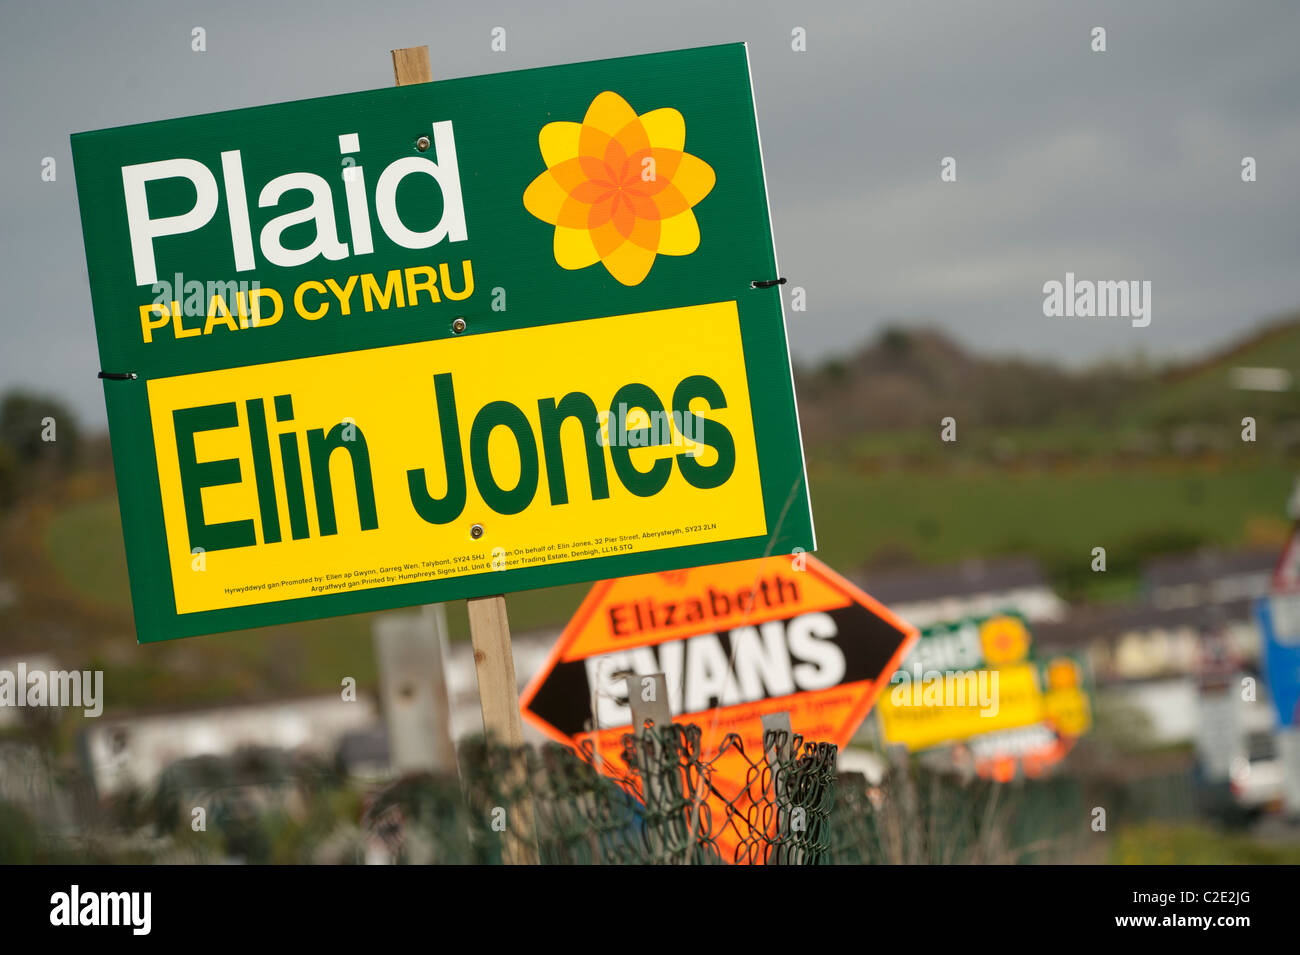 Plaid Cymru 2011 Wales Assembly Government election campaign banners in Elin Jones' Ceredigion constituency, UK Stock Photo